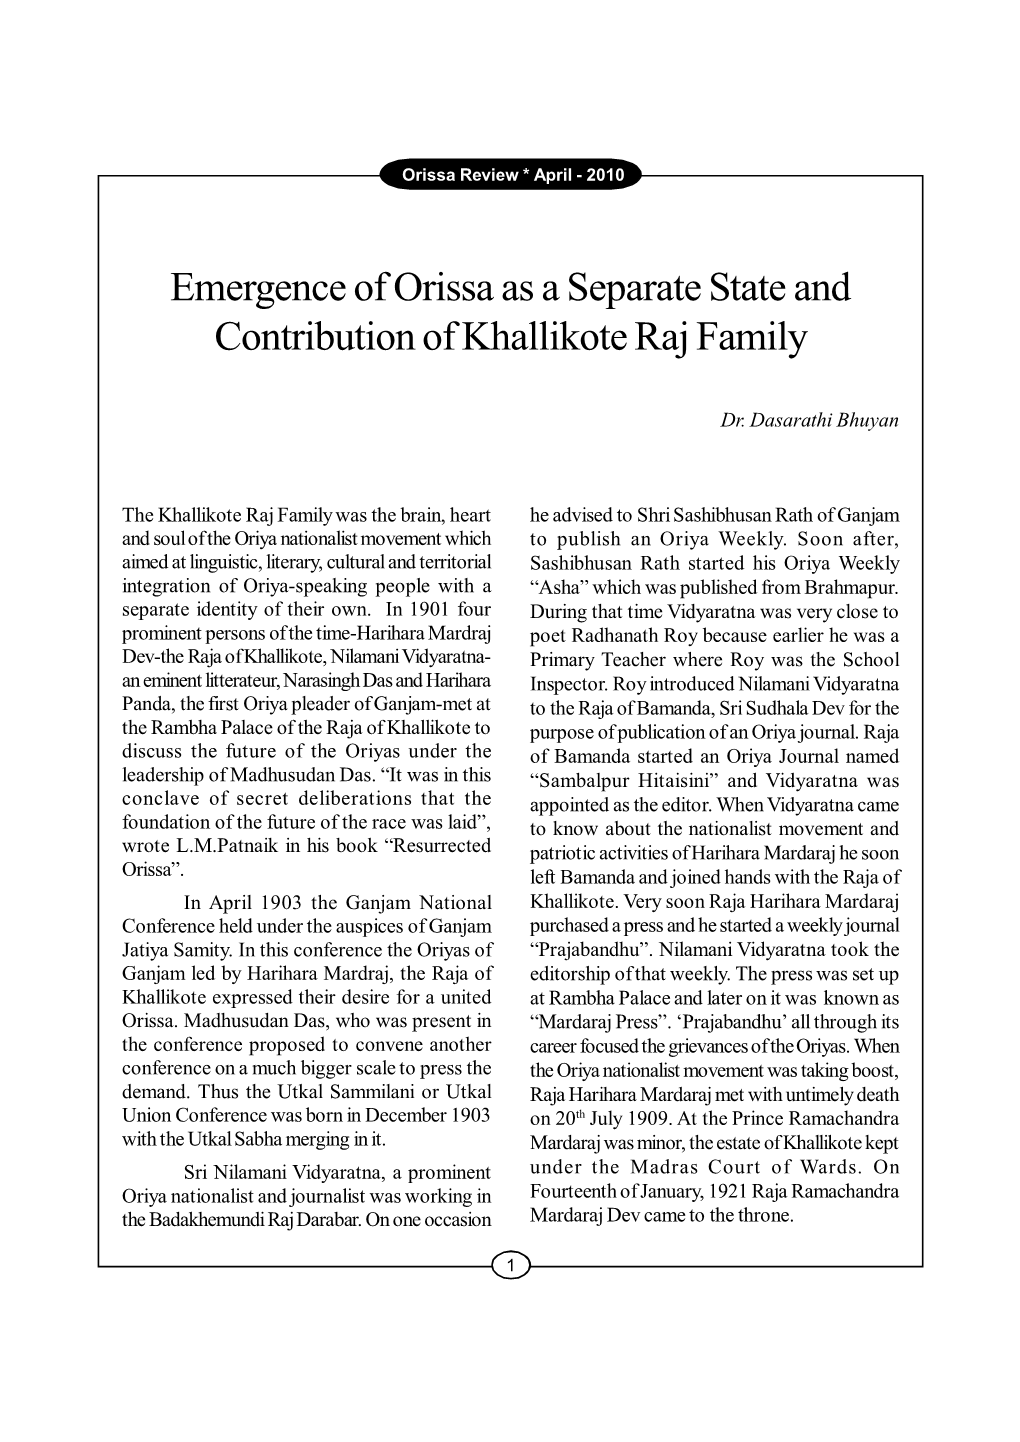 Emergence of Orissa As a Separate State and Contribution of Khallikote Raj Family